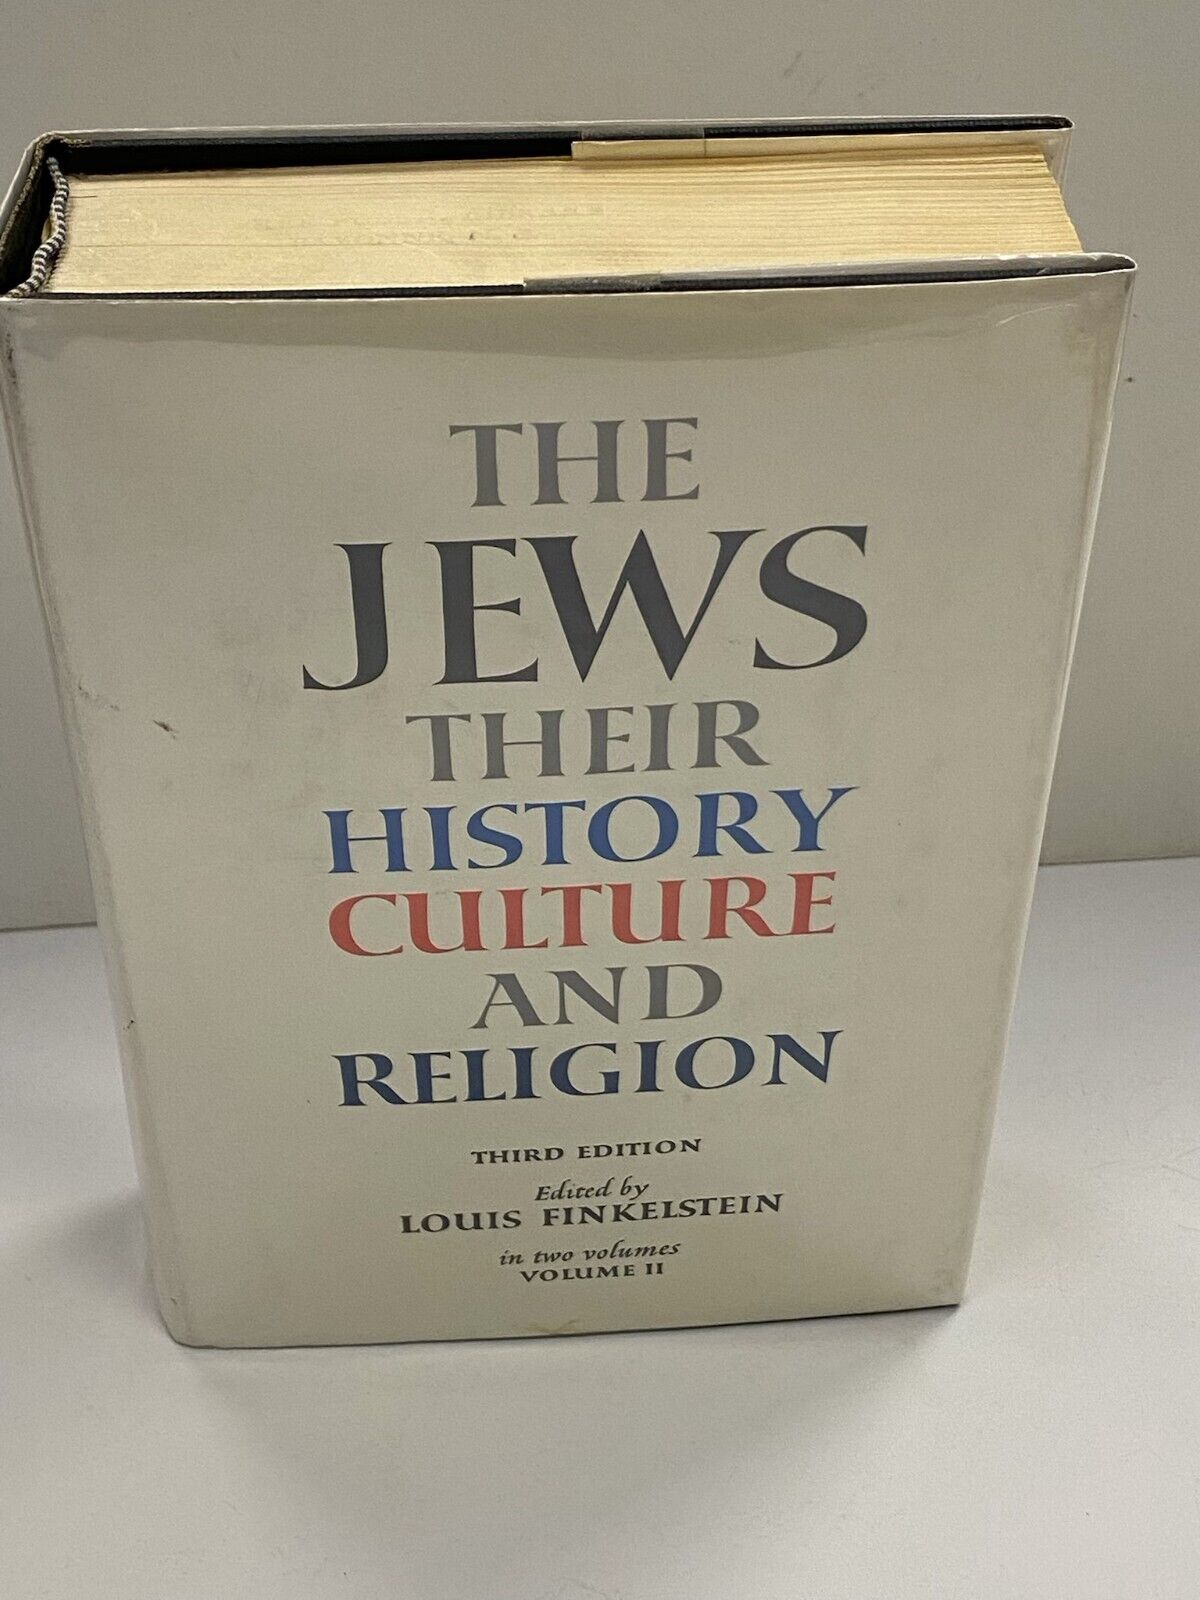 THE JEWS THEIR HISTORY CULTURE & RELIGION 3rd Edition Volume 2 VINTAGE BOOK Mint